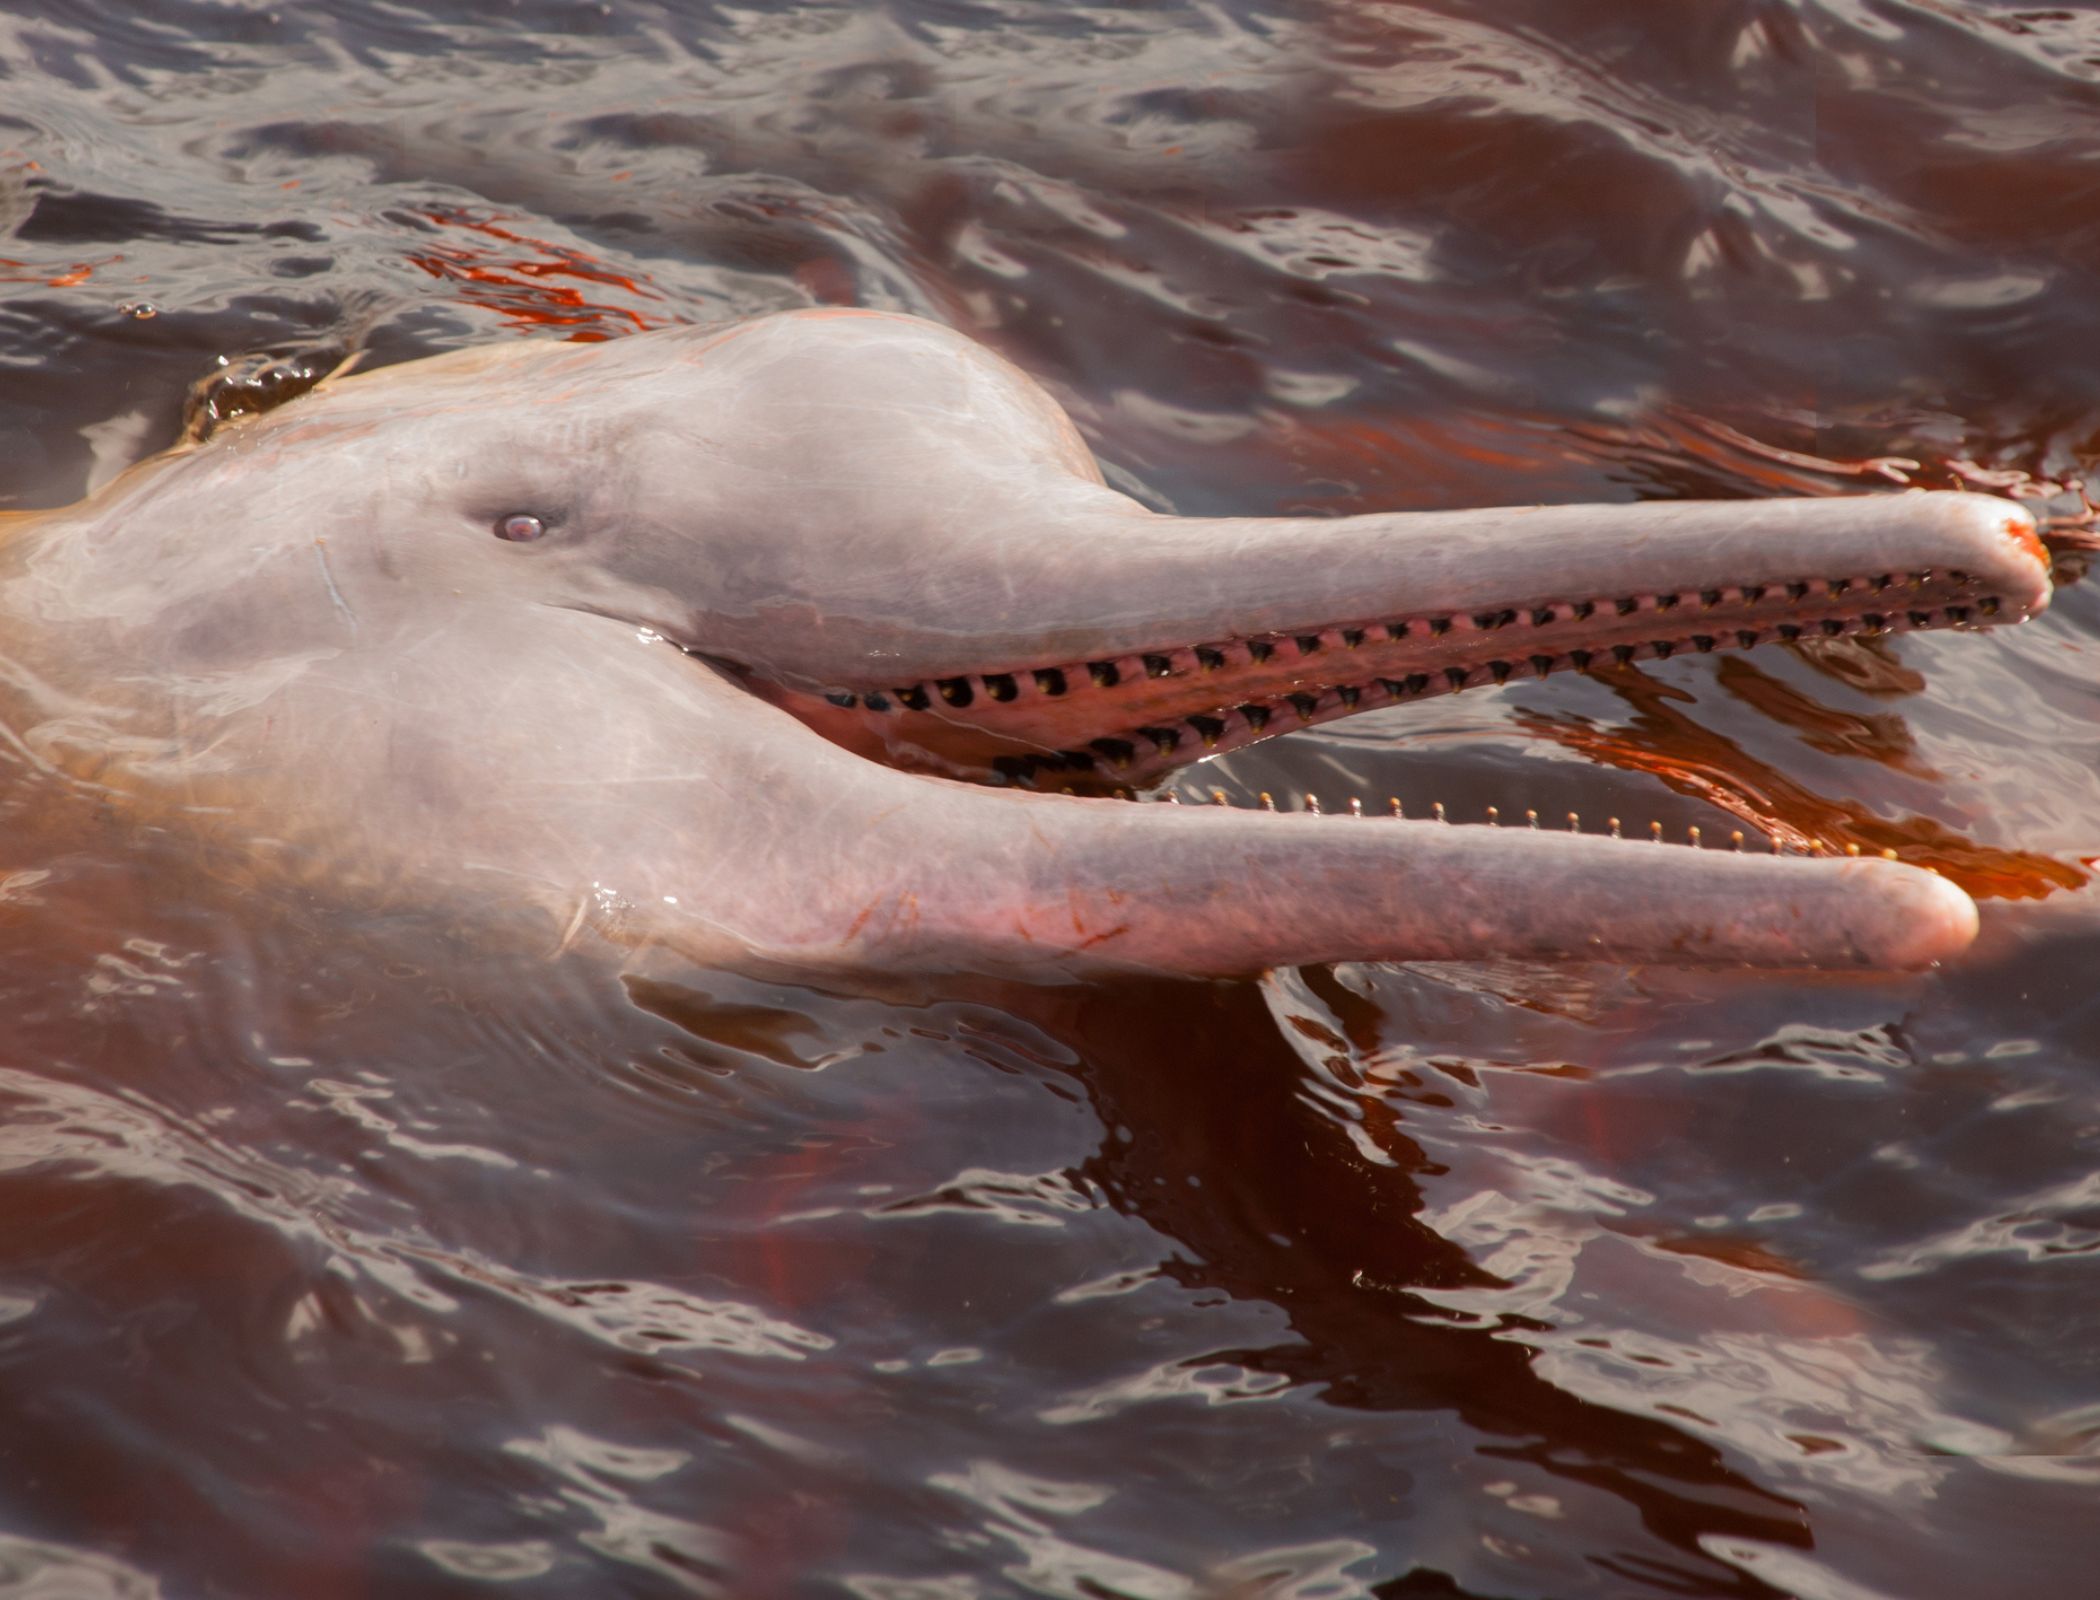 Amazon dolphin numbers threatened by proposed dams and dredging